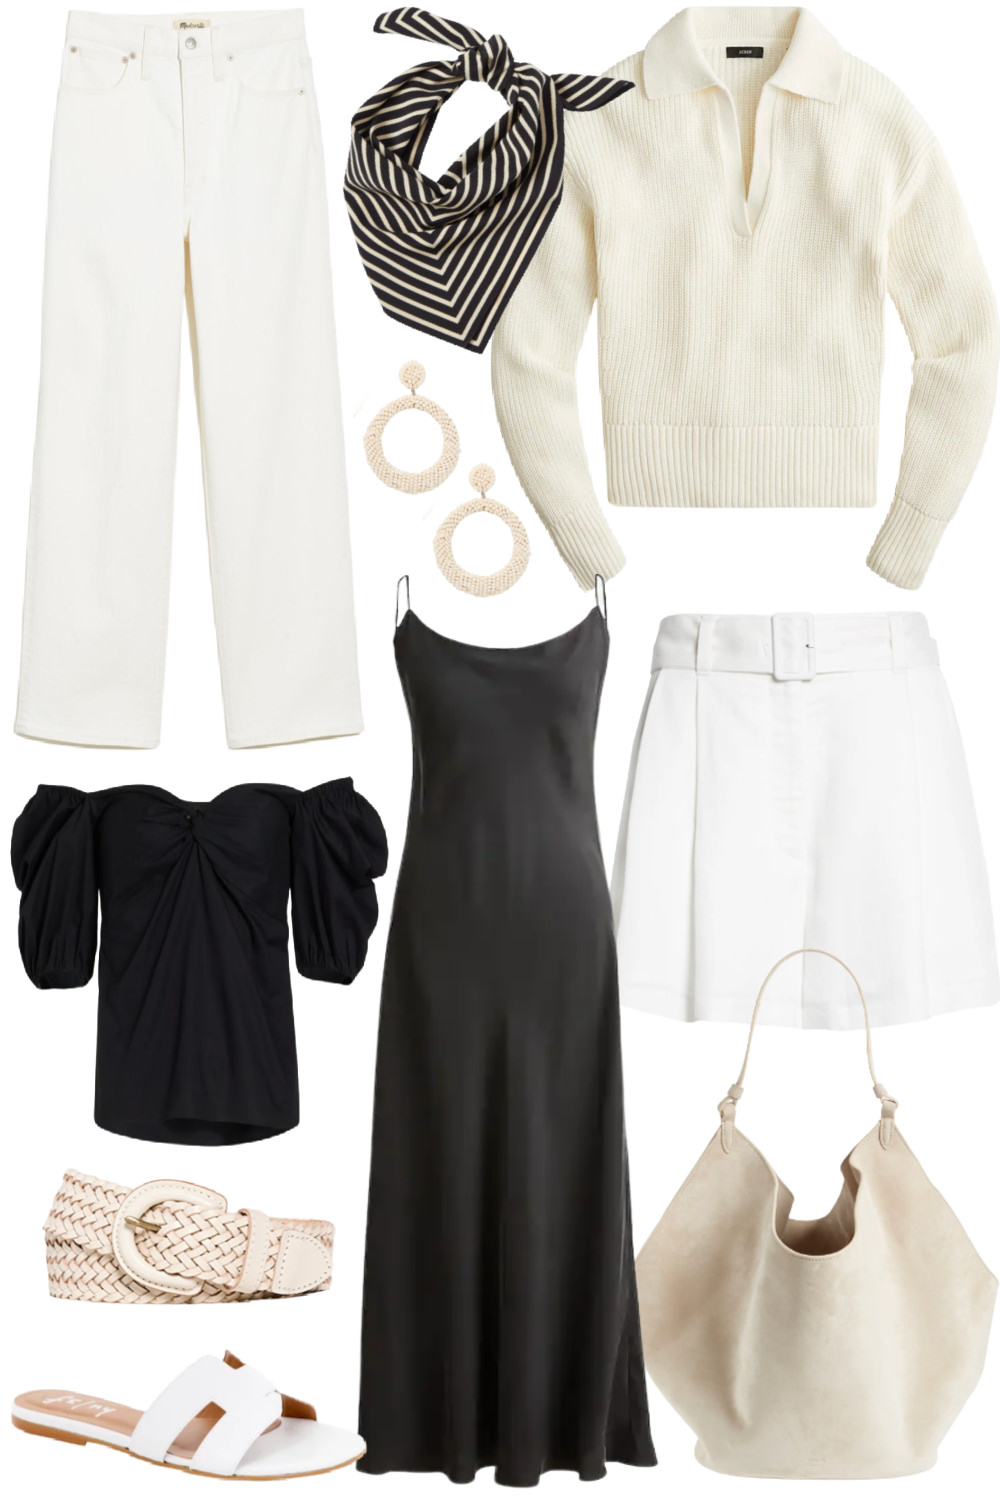 Black and White Summer Outfit